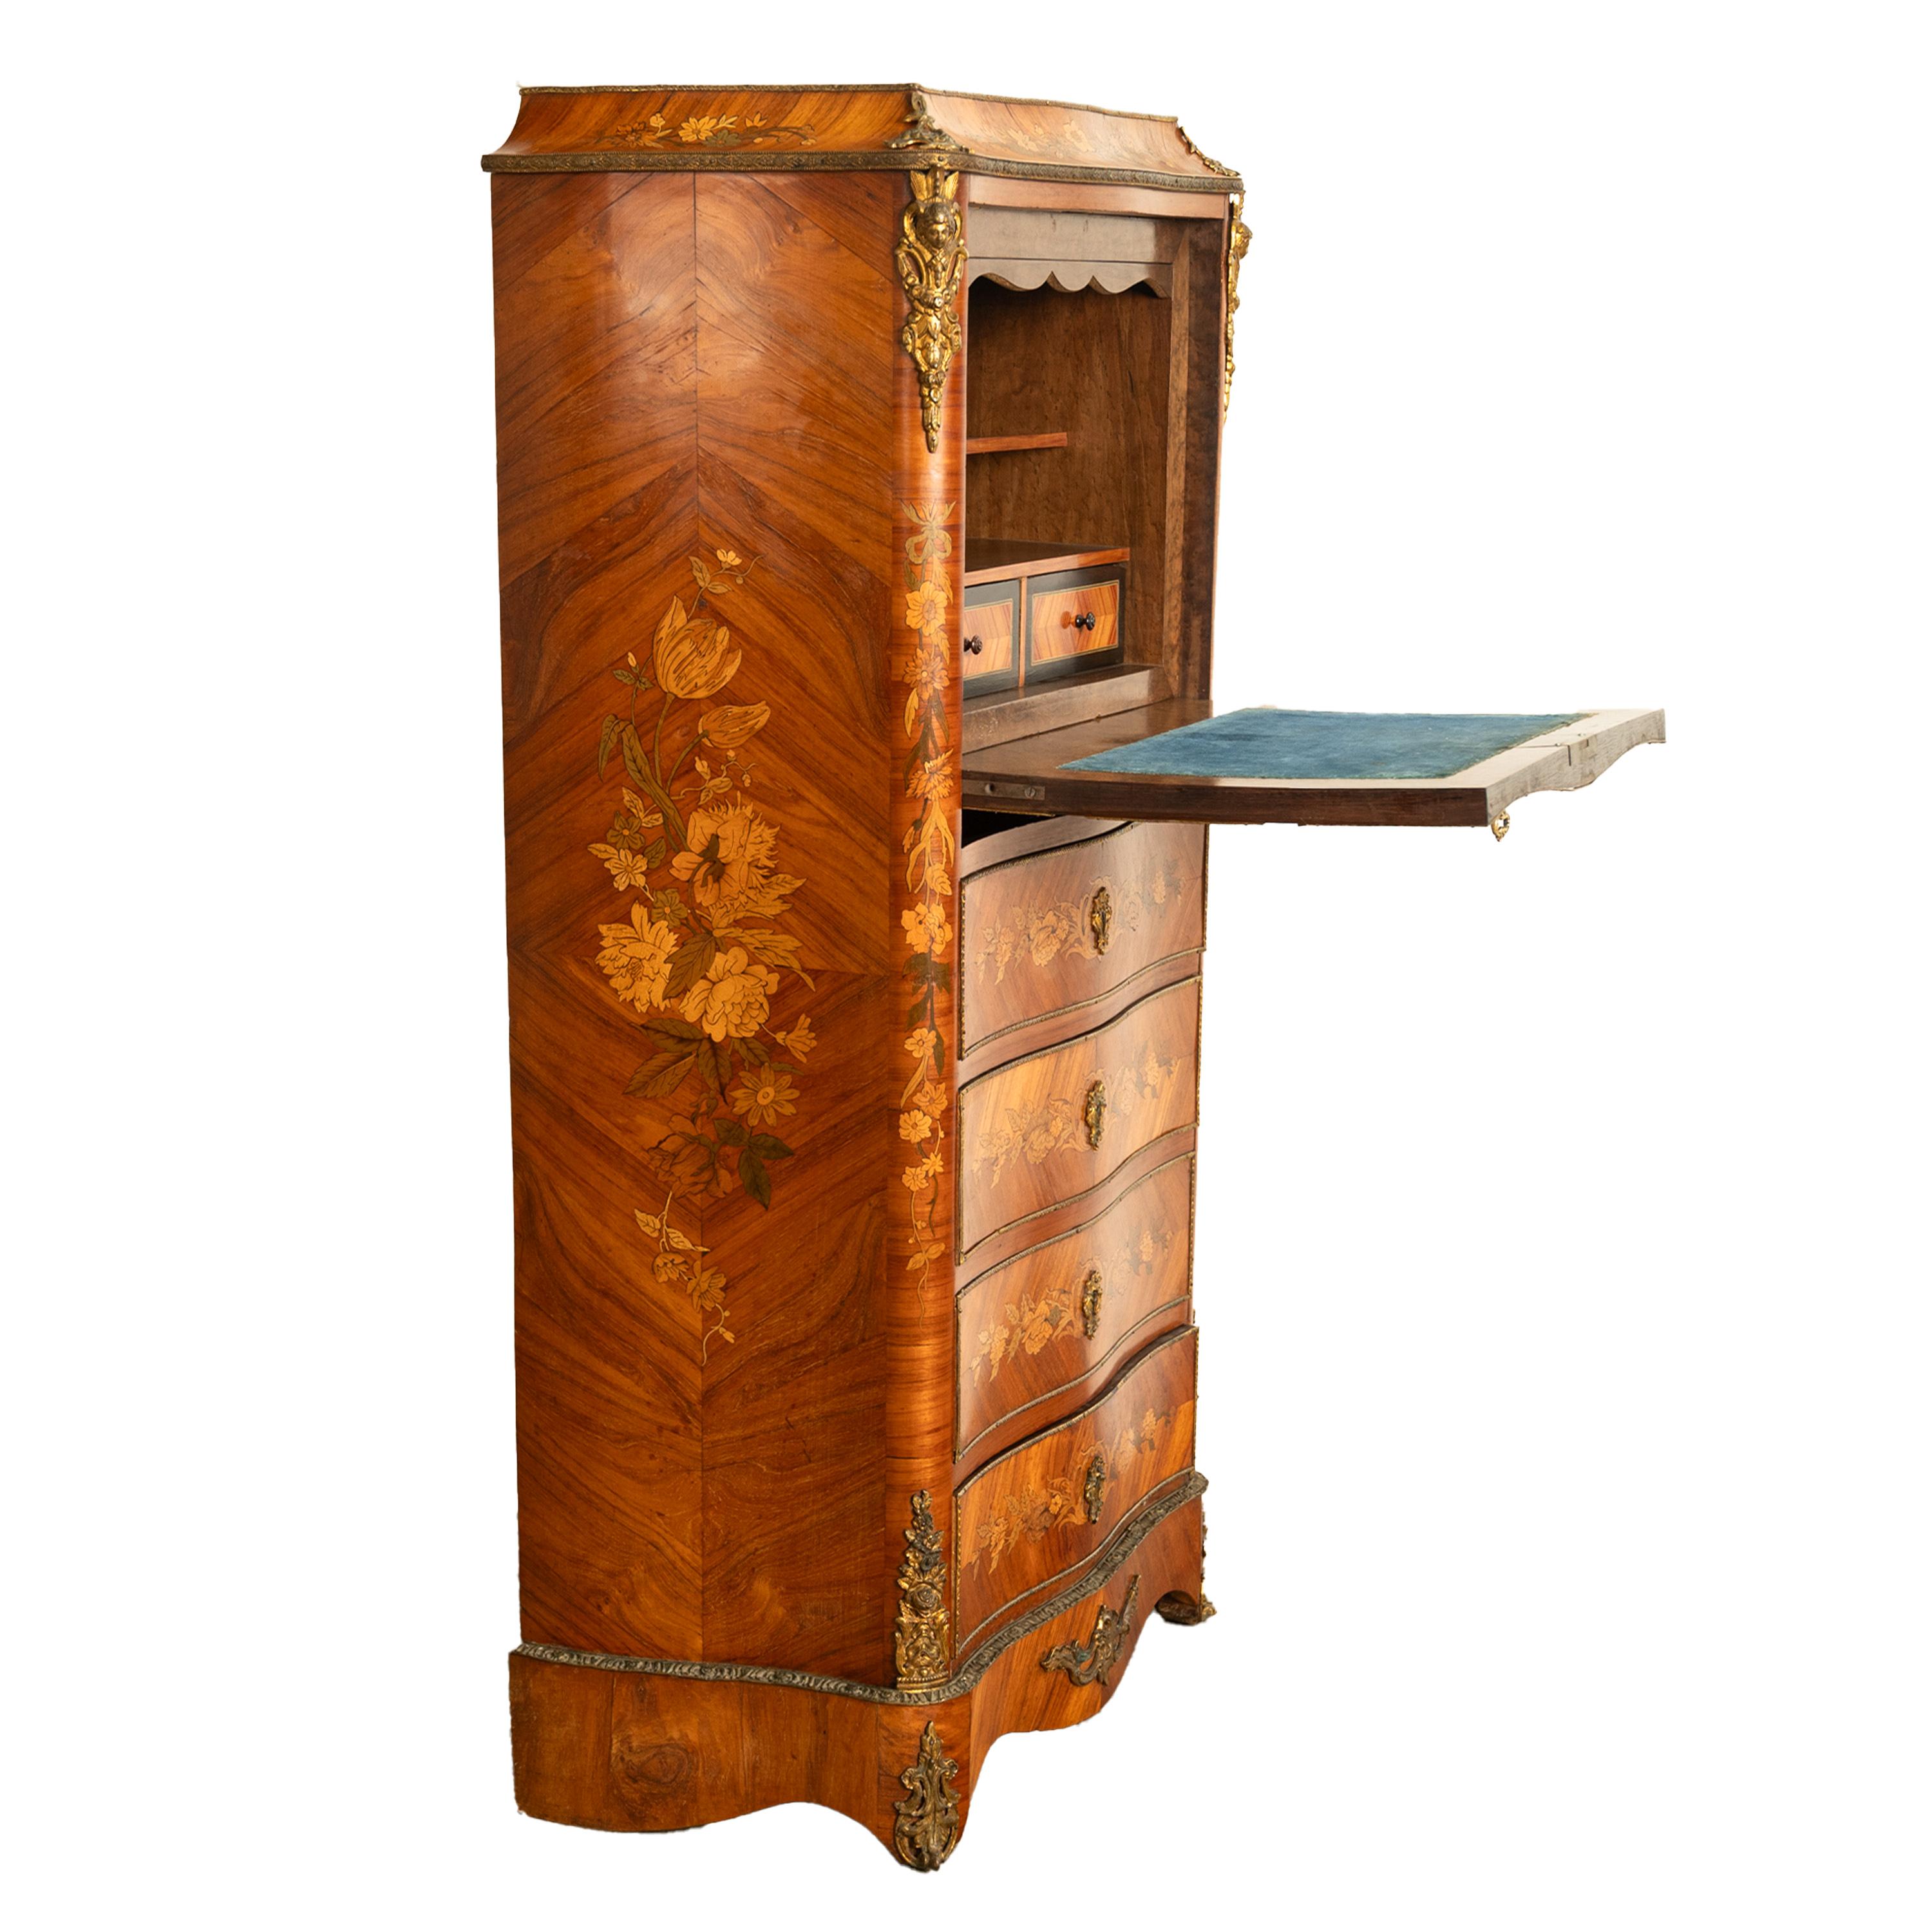 Fine Antique French Louis XV Marquetry Rosewood Ormolu Secretaire Abattant 1880 For Sale 7